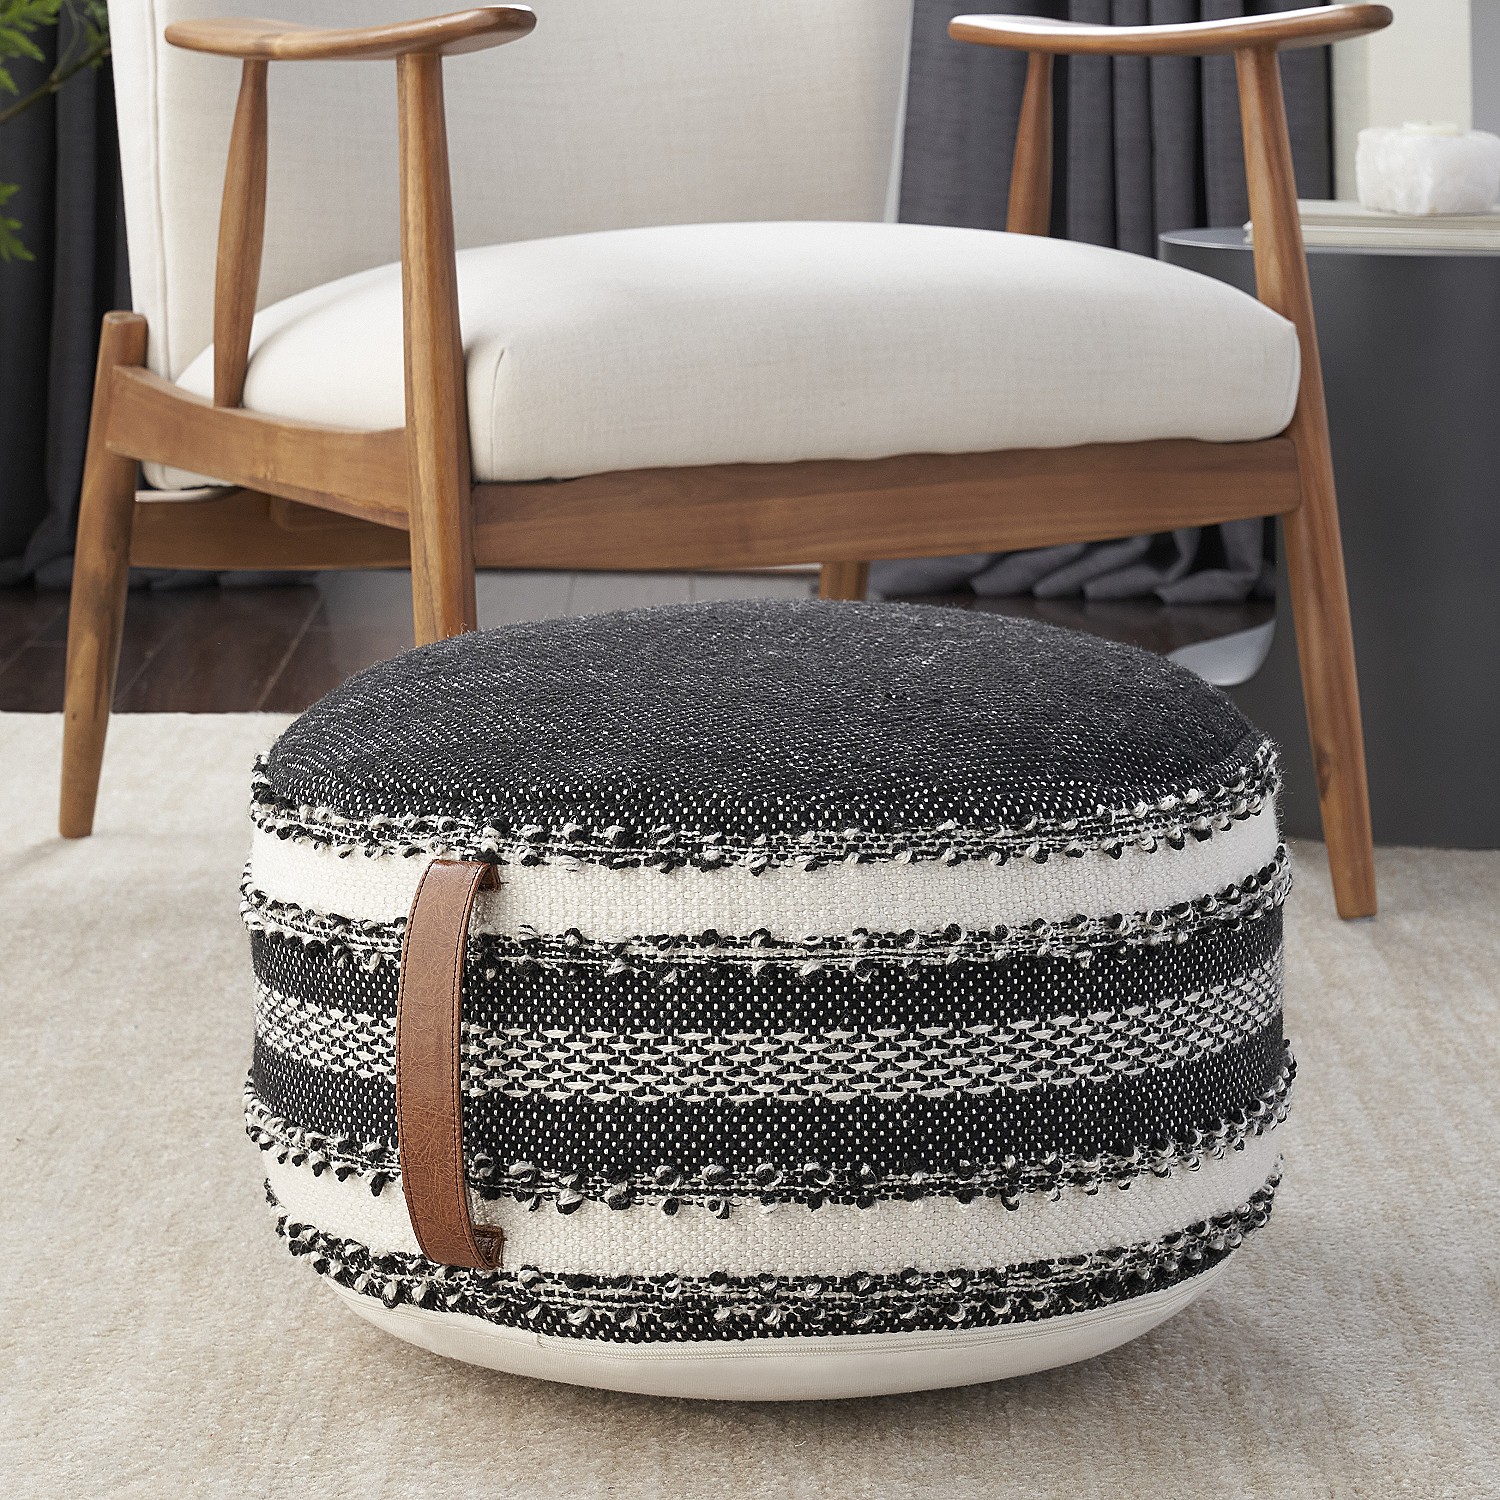 Mina Victory Outdoor Woven Stripes & Dots Black Pouf 20" x 20" x 12" - image 4 of 4